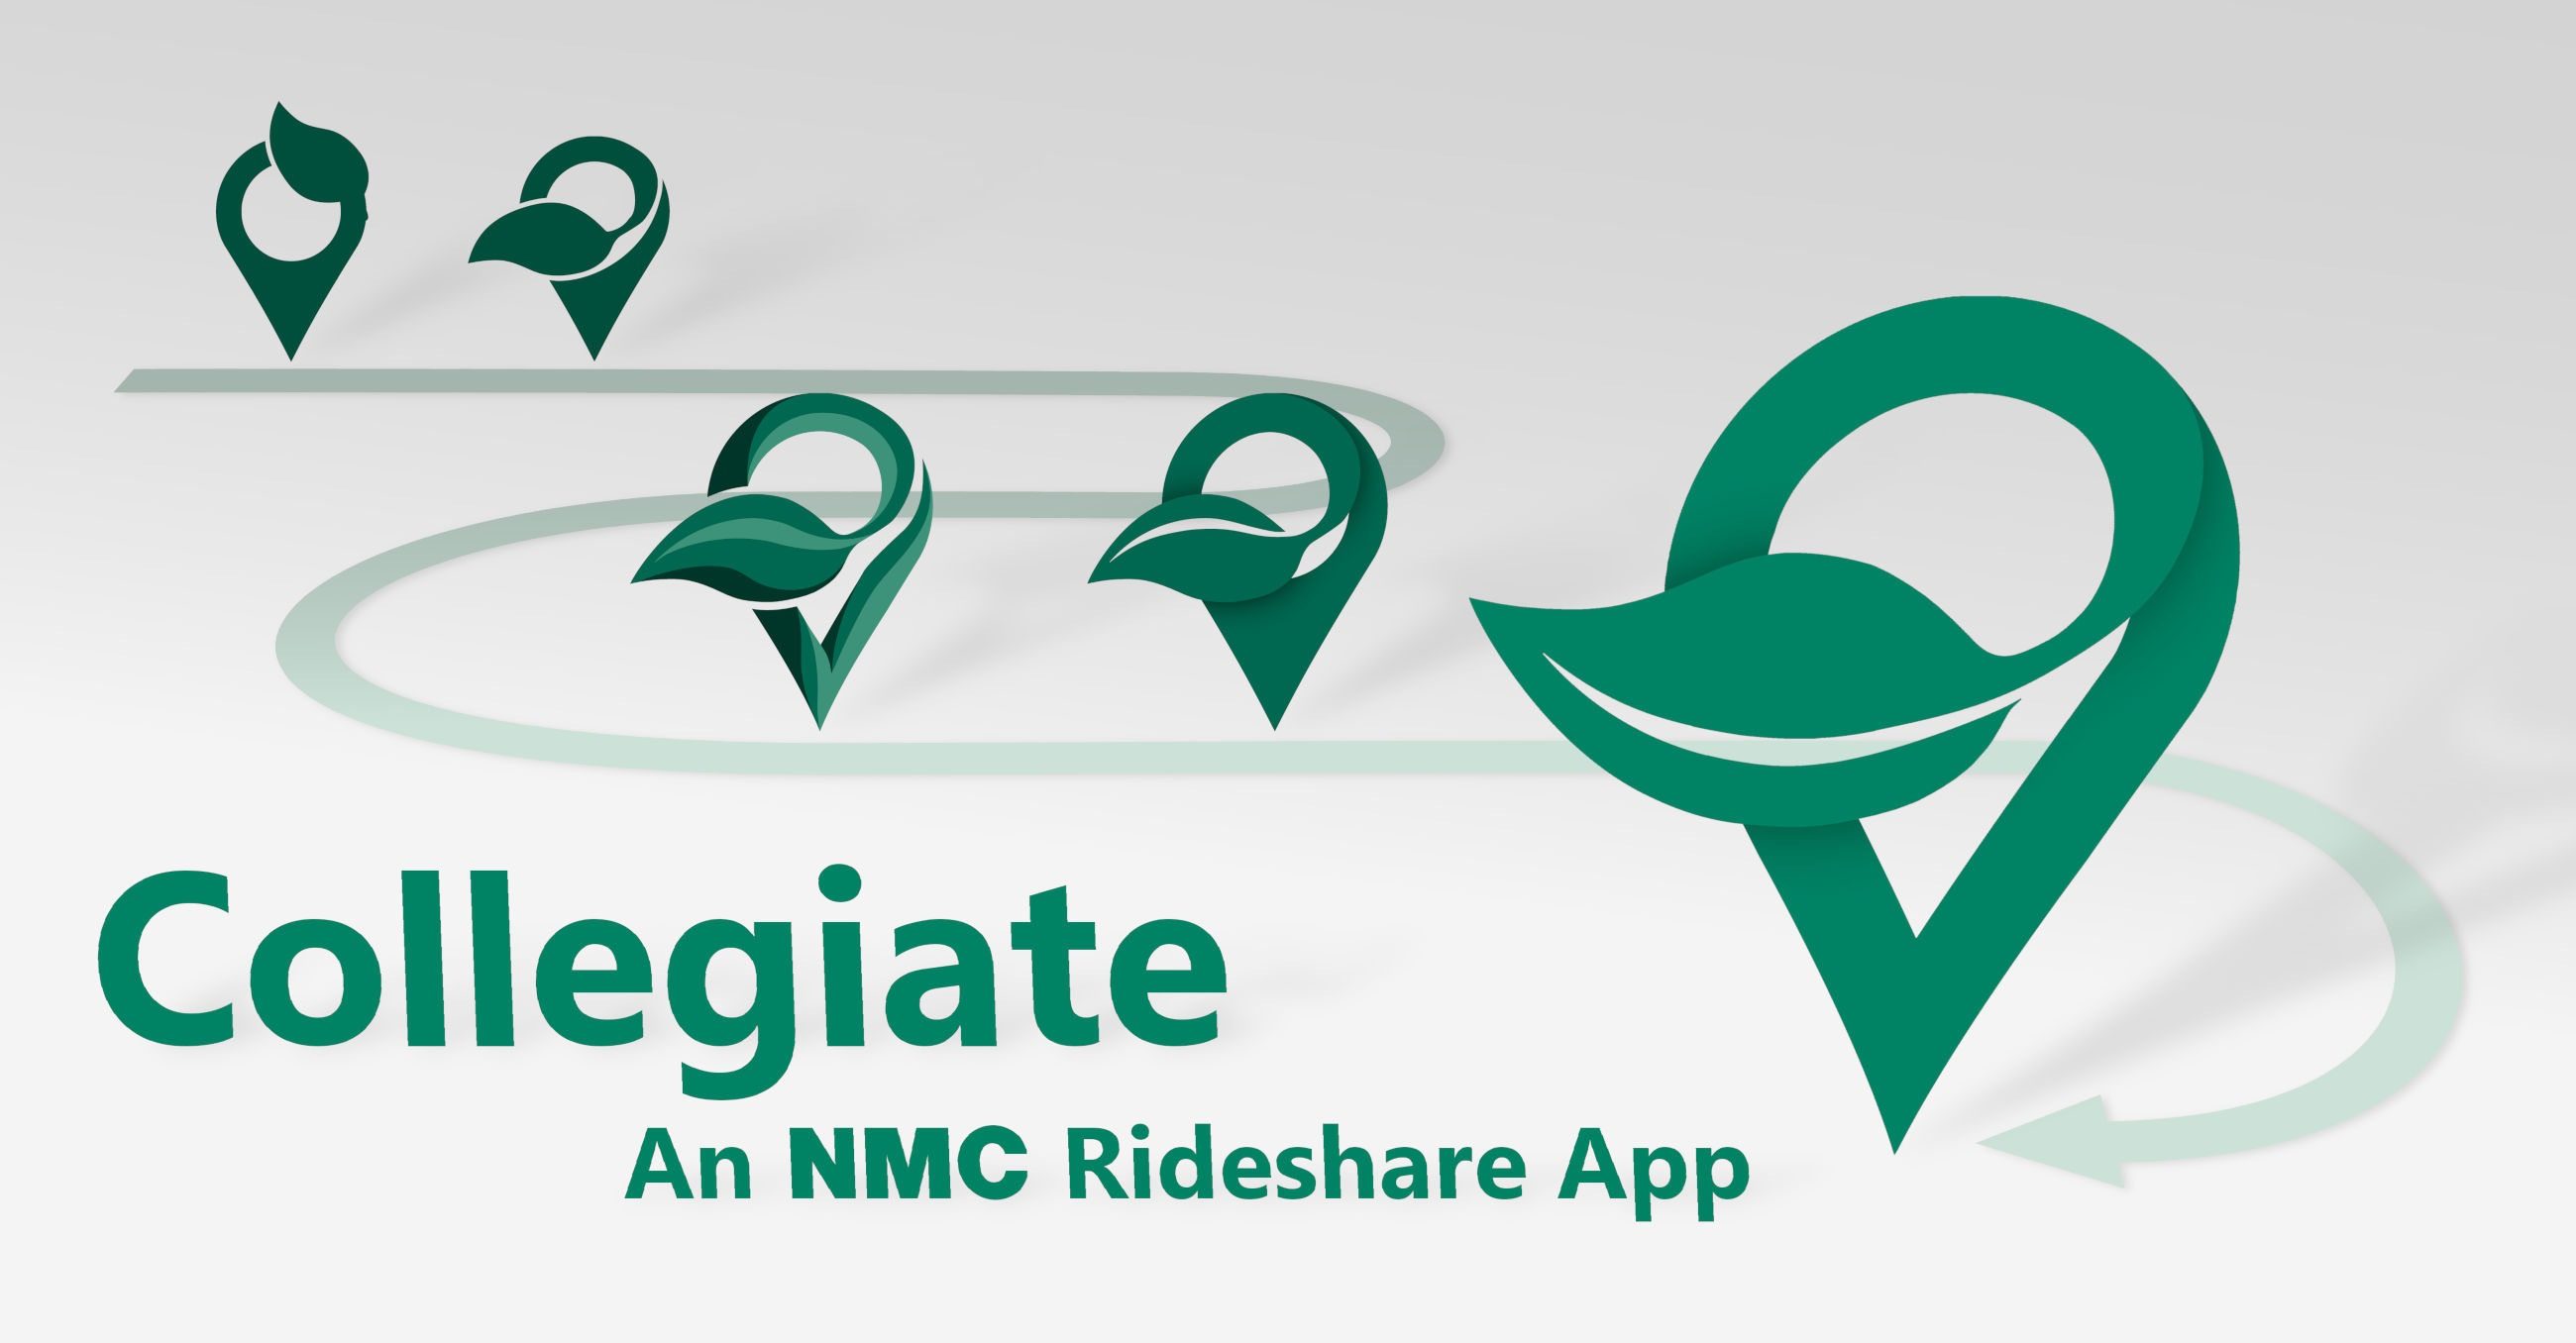 Depicts workflow for creation of a commissioned logo for the Northwestern Michigan College (NMC) rideshare app Collegiate.